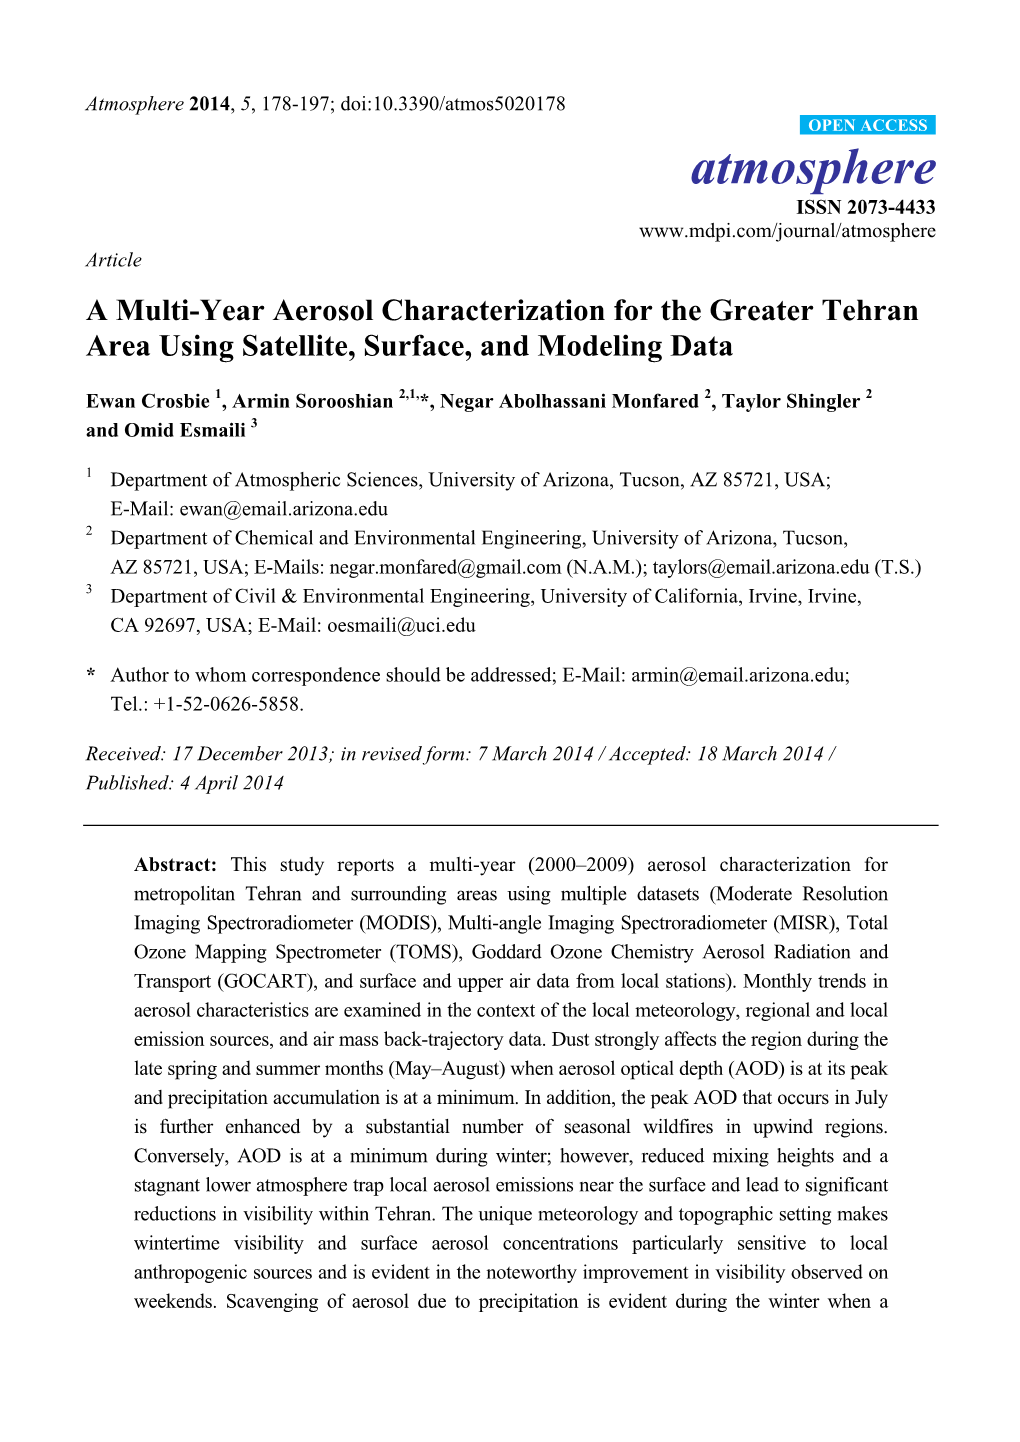 A Multi-Year Aerosol Characterization for the Greater Tehran Area Using Satellite, Surface, and Modeling Data